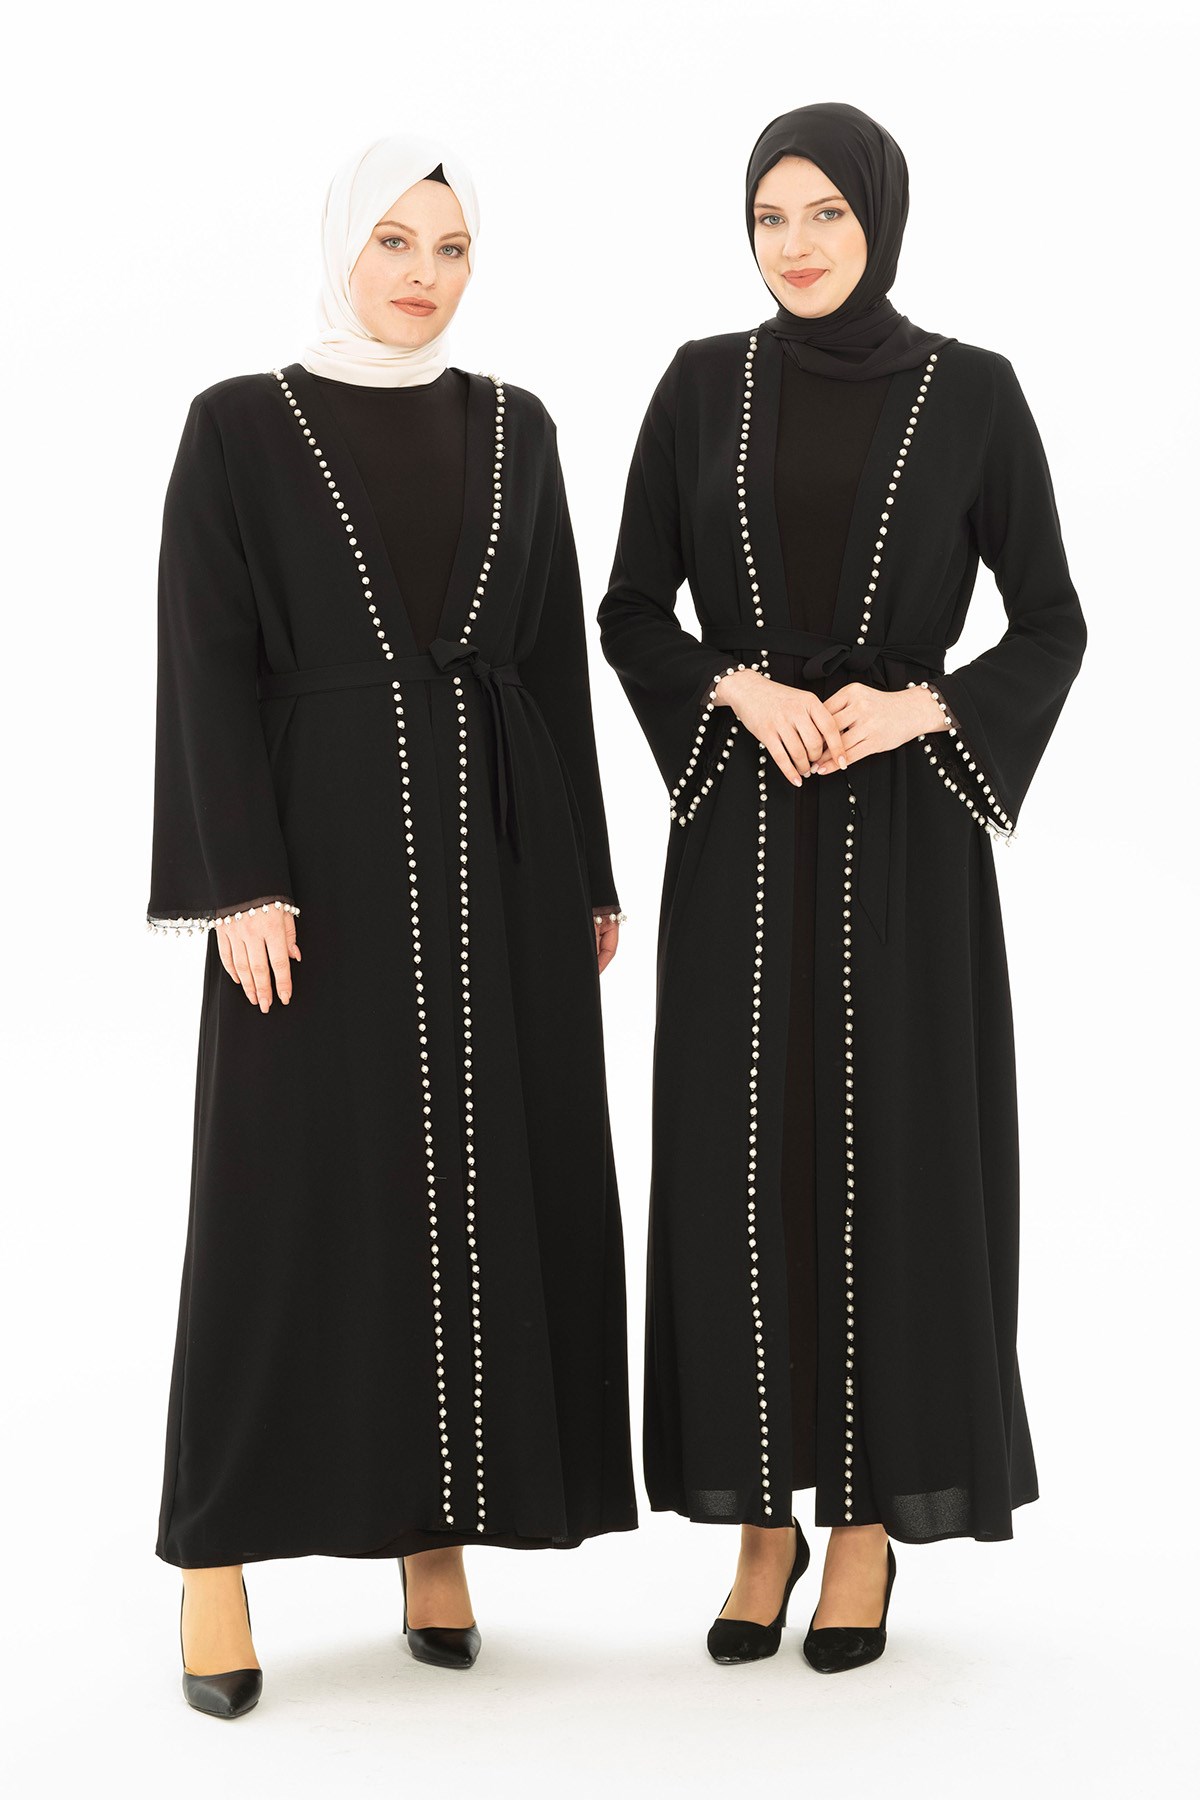 Belted, black abaya with pockets and bell sleeve, inner lining, and pearl  details on the front and sleeve.